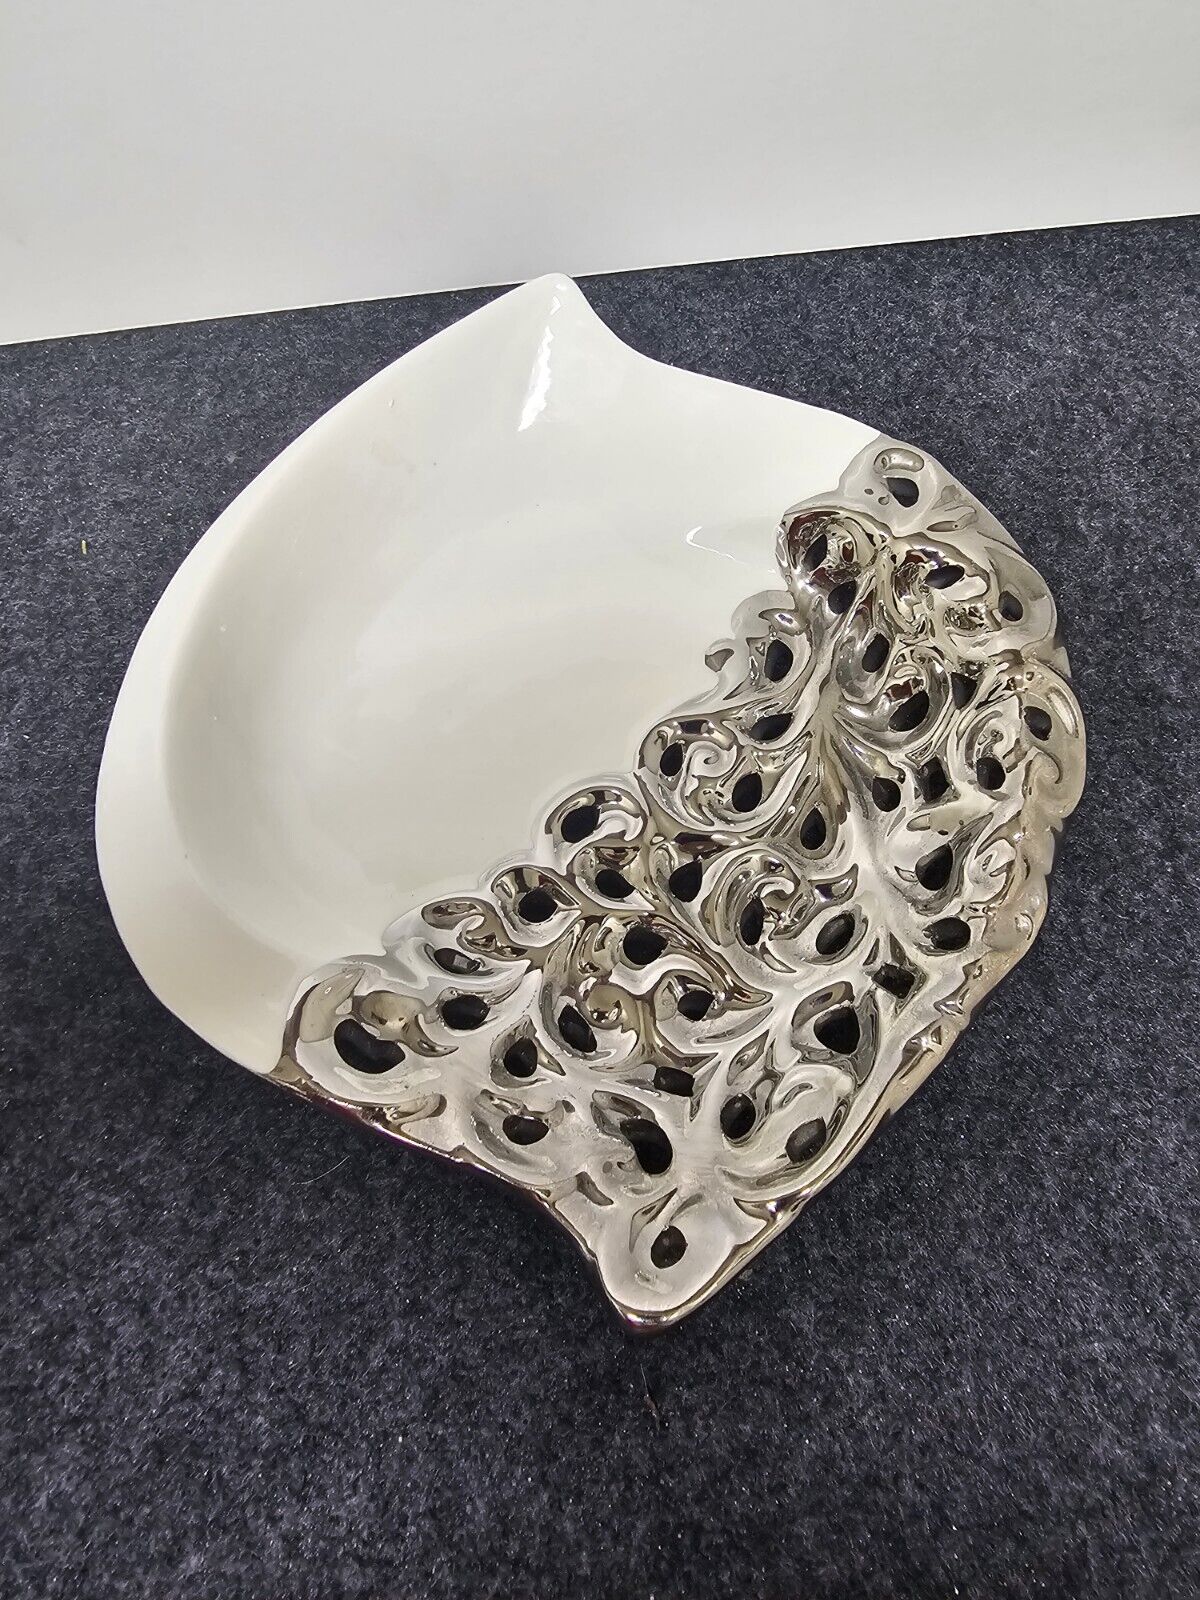 Vintage Silver Plated White Ceramic Porcelin Candy Dish